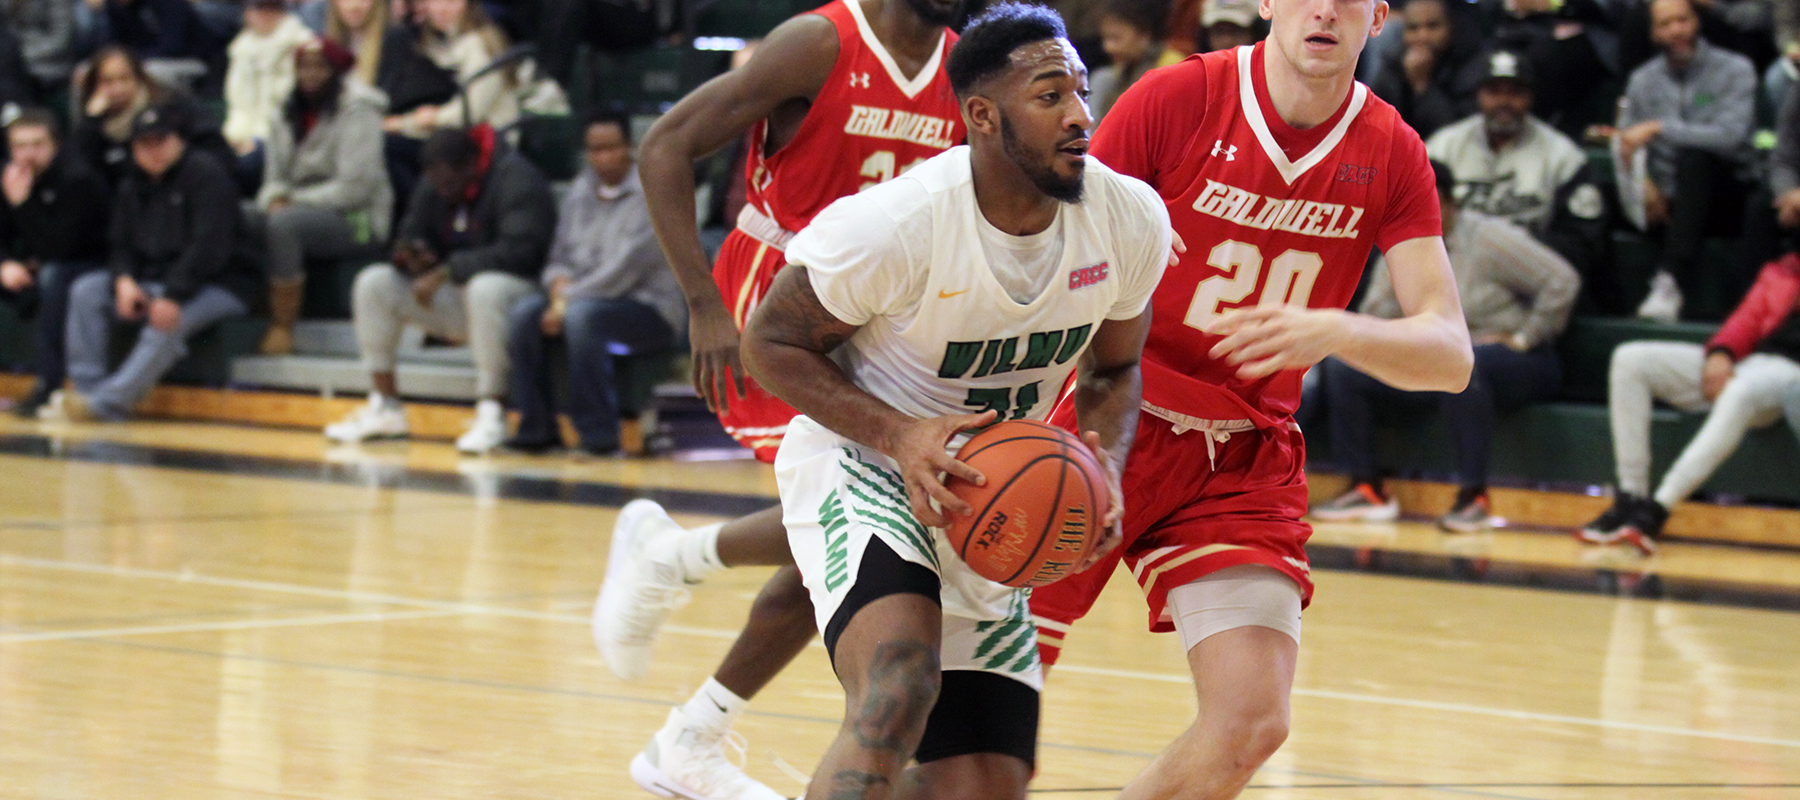 Copyright 2019; Wilmington University. All rights reserved. Photo of Thomas Farrior who finished with a double-double against Caldwell. Photo by Kate Tubo. February 2, 2019 vs. Caldwell.